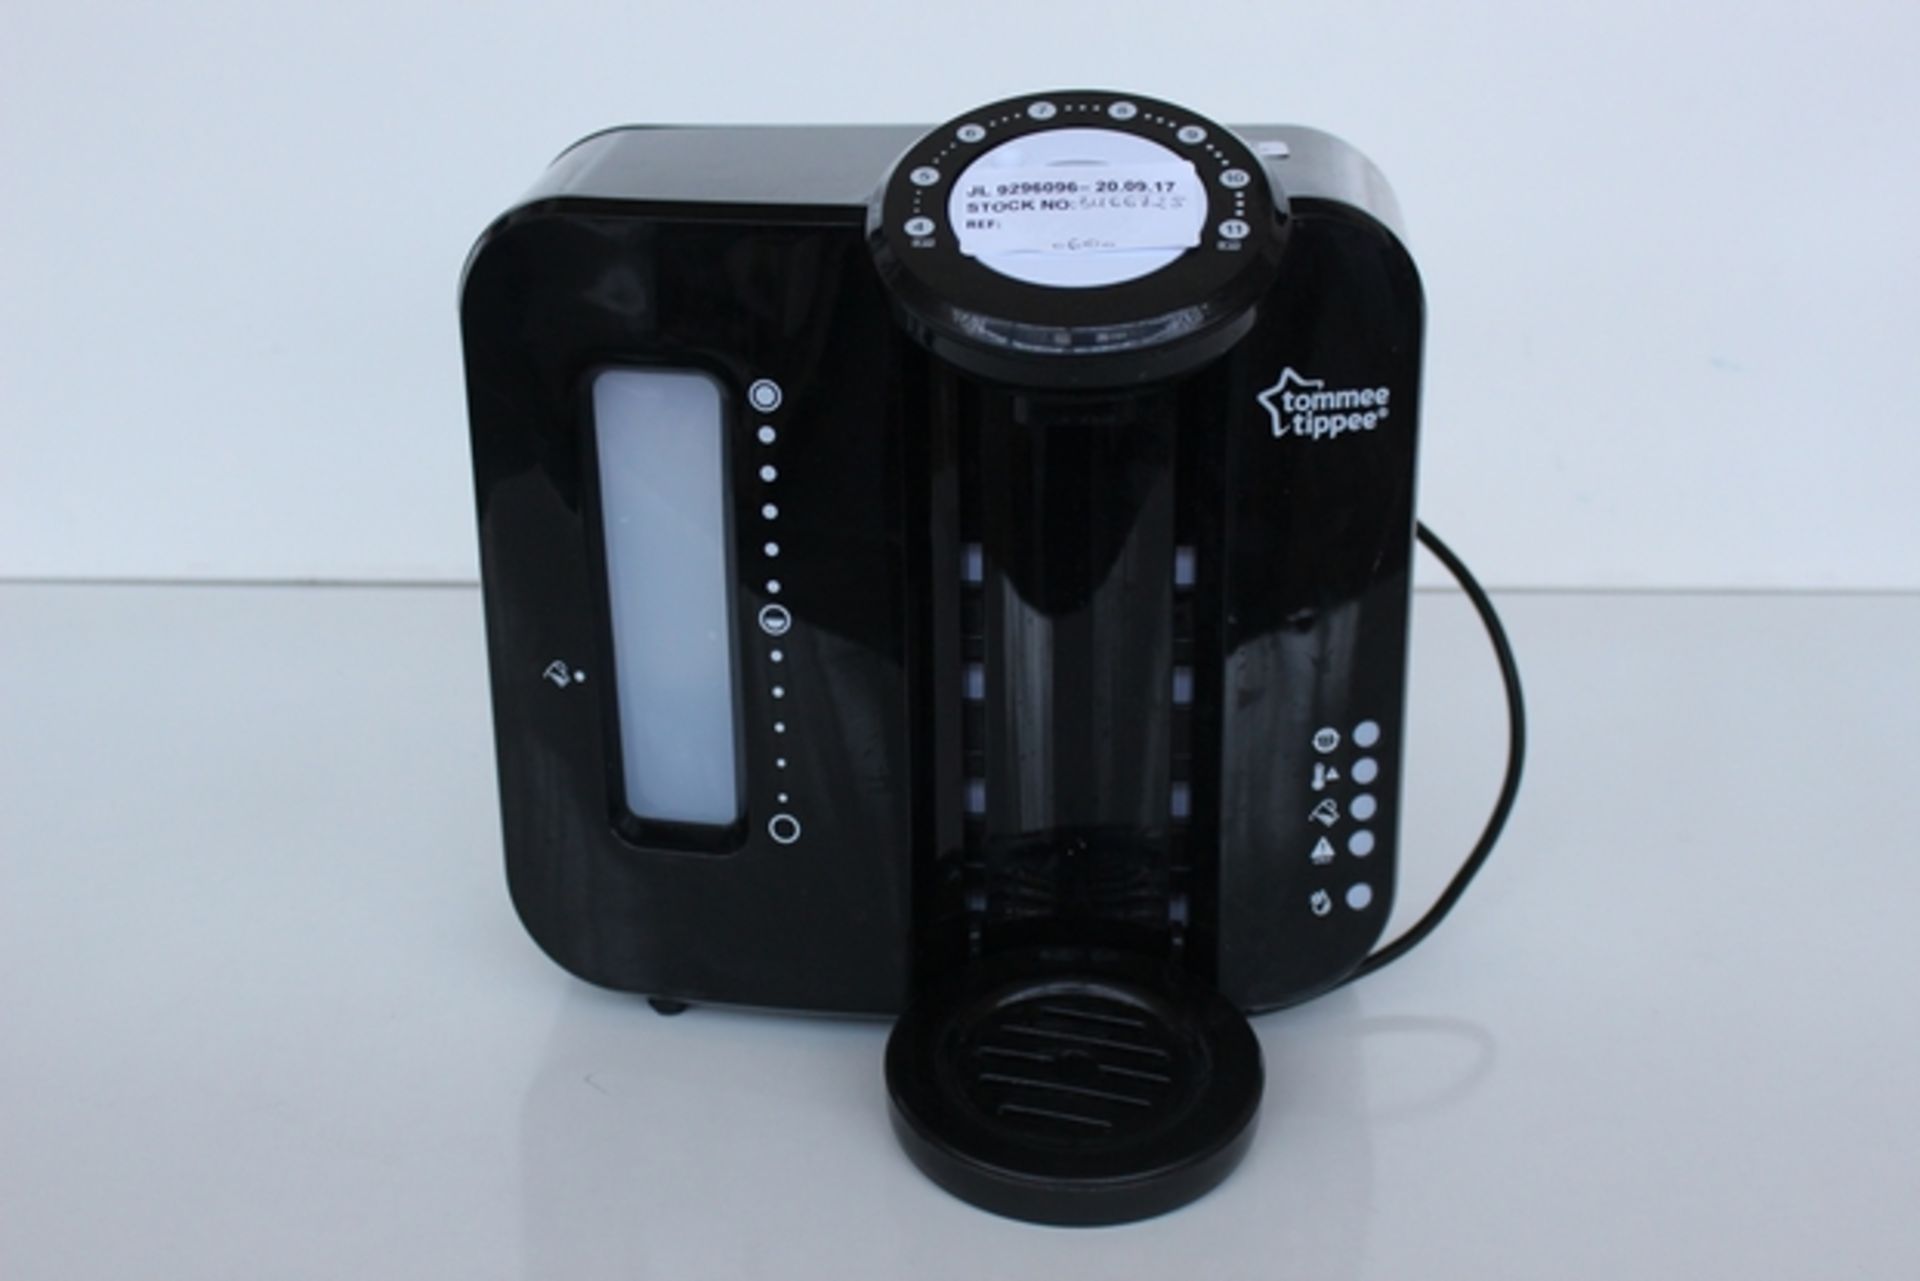 1X TOMMIE TIPPEE CLOSER TO NATURE PERFECT PREP MACHINE RRP £60 (JL-9296096) (20/09/17) (3466725)